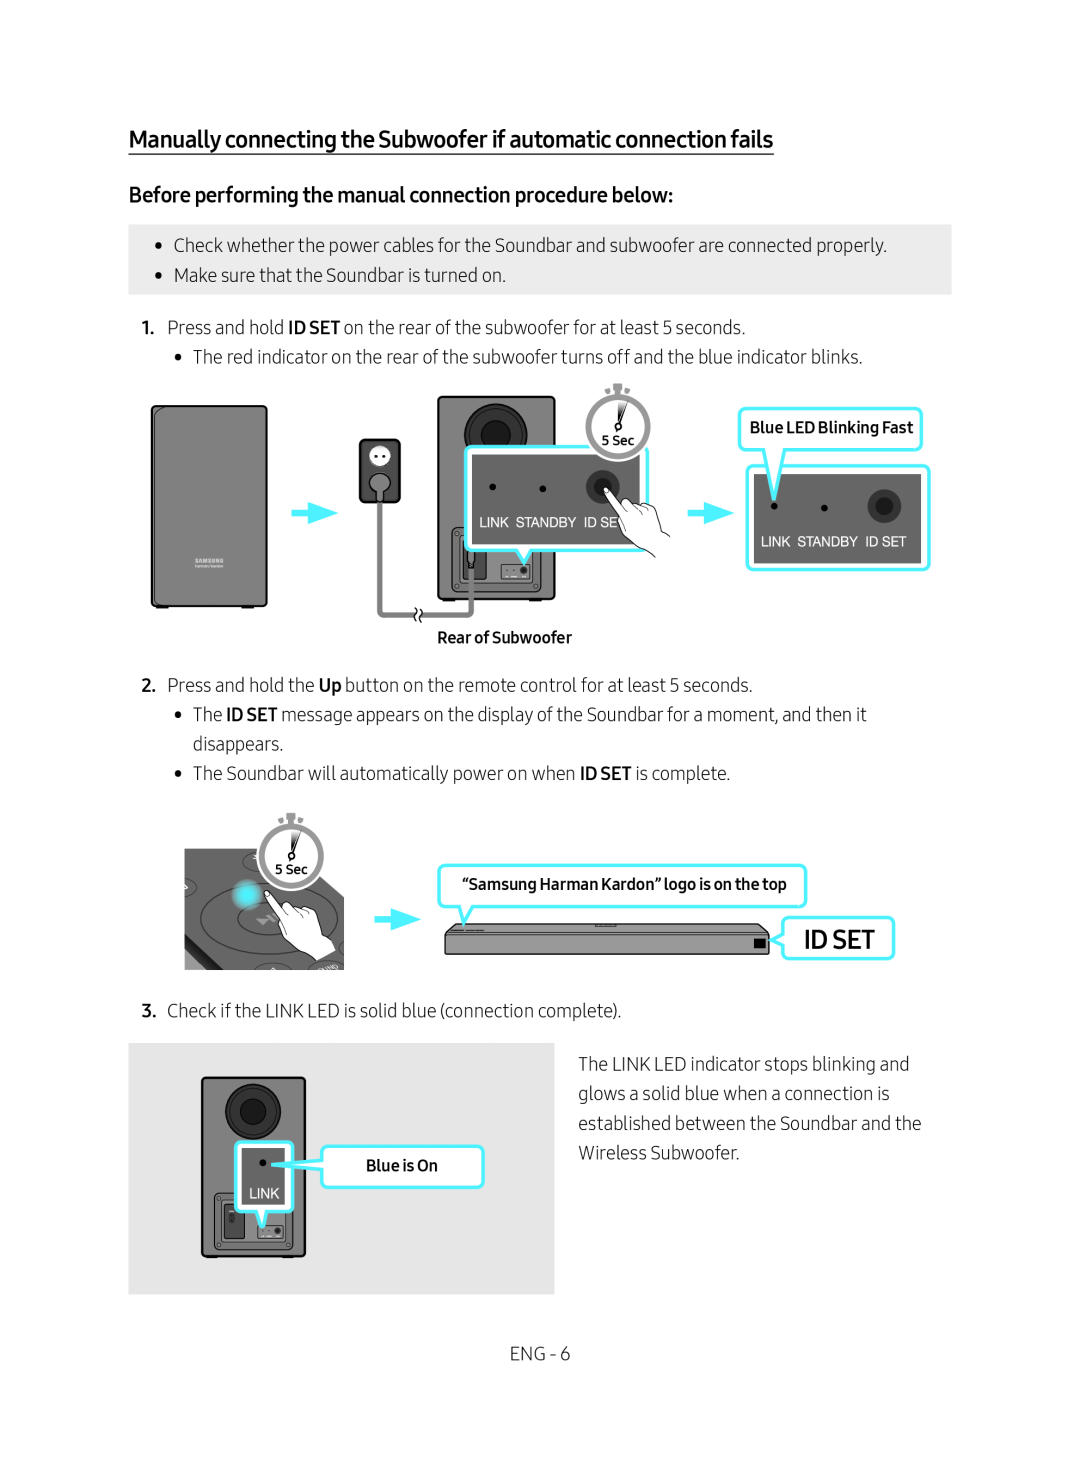 Before performing the manual connection procedure below: Dolby Atmos HW-N850